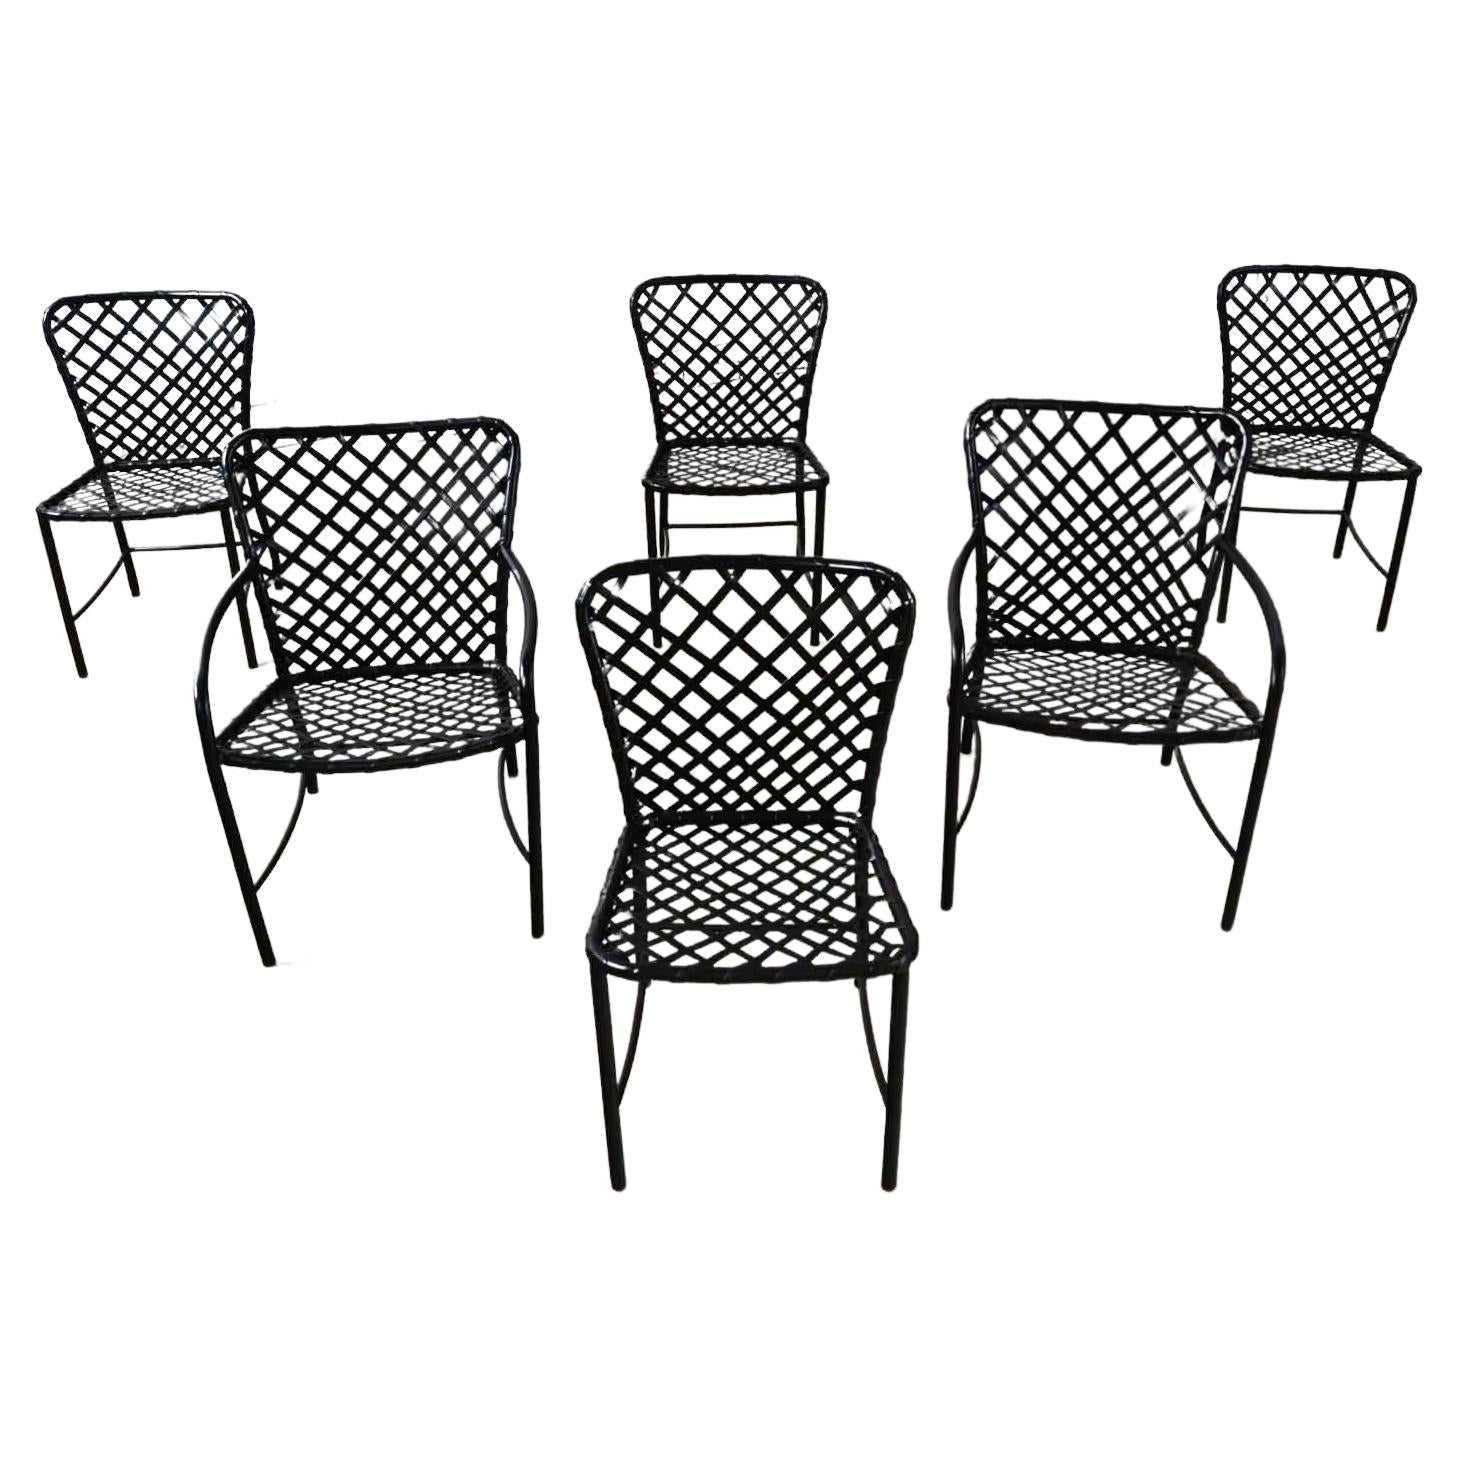 6 MCM Brown Jordan Tamiami Outdoor Dining Chairs 4 Side & 2 Arm by Hall Bradley